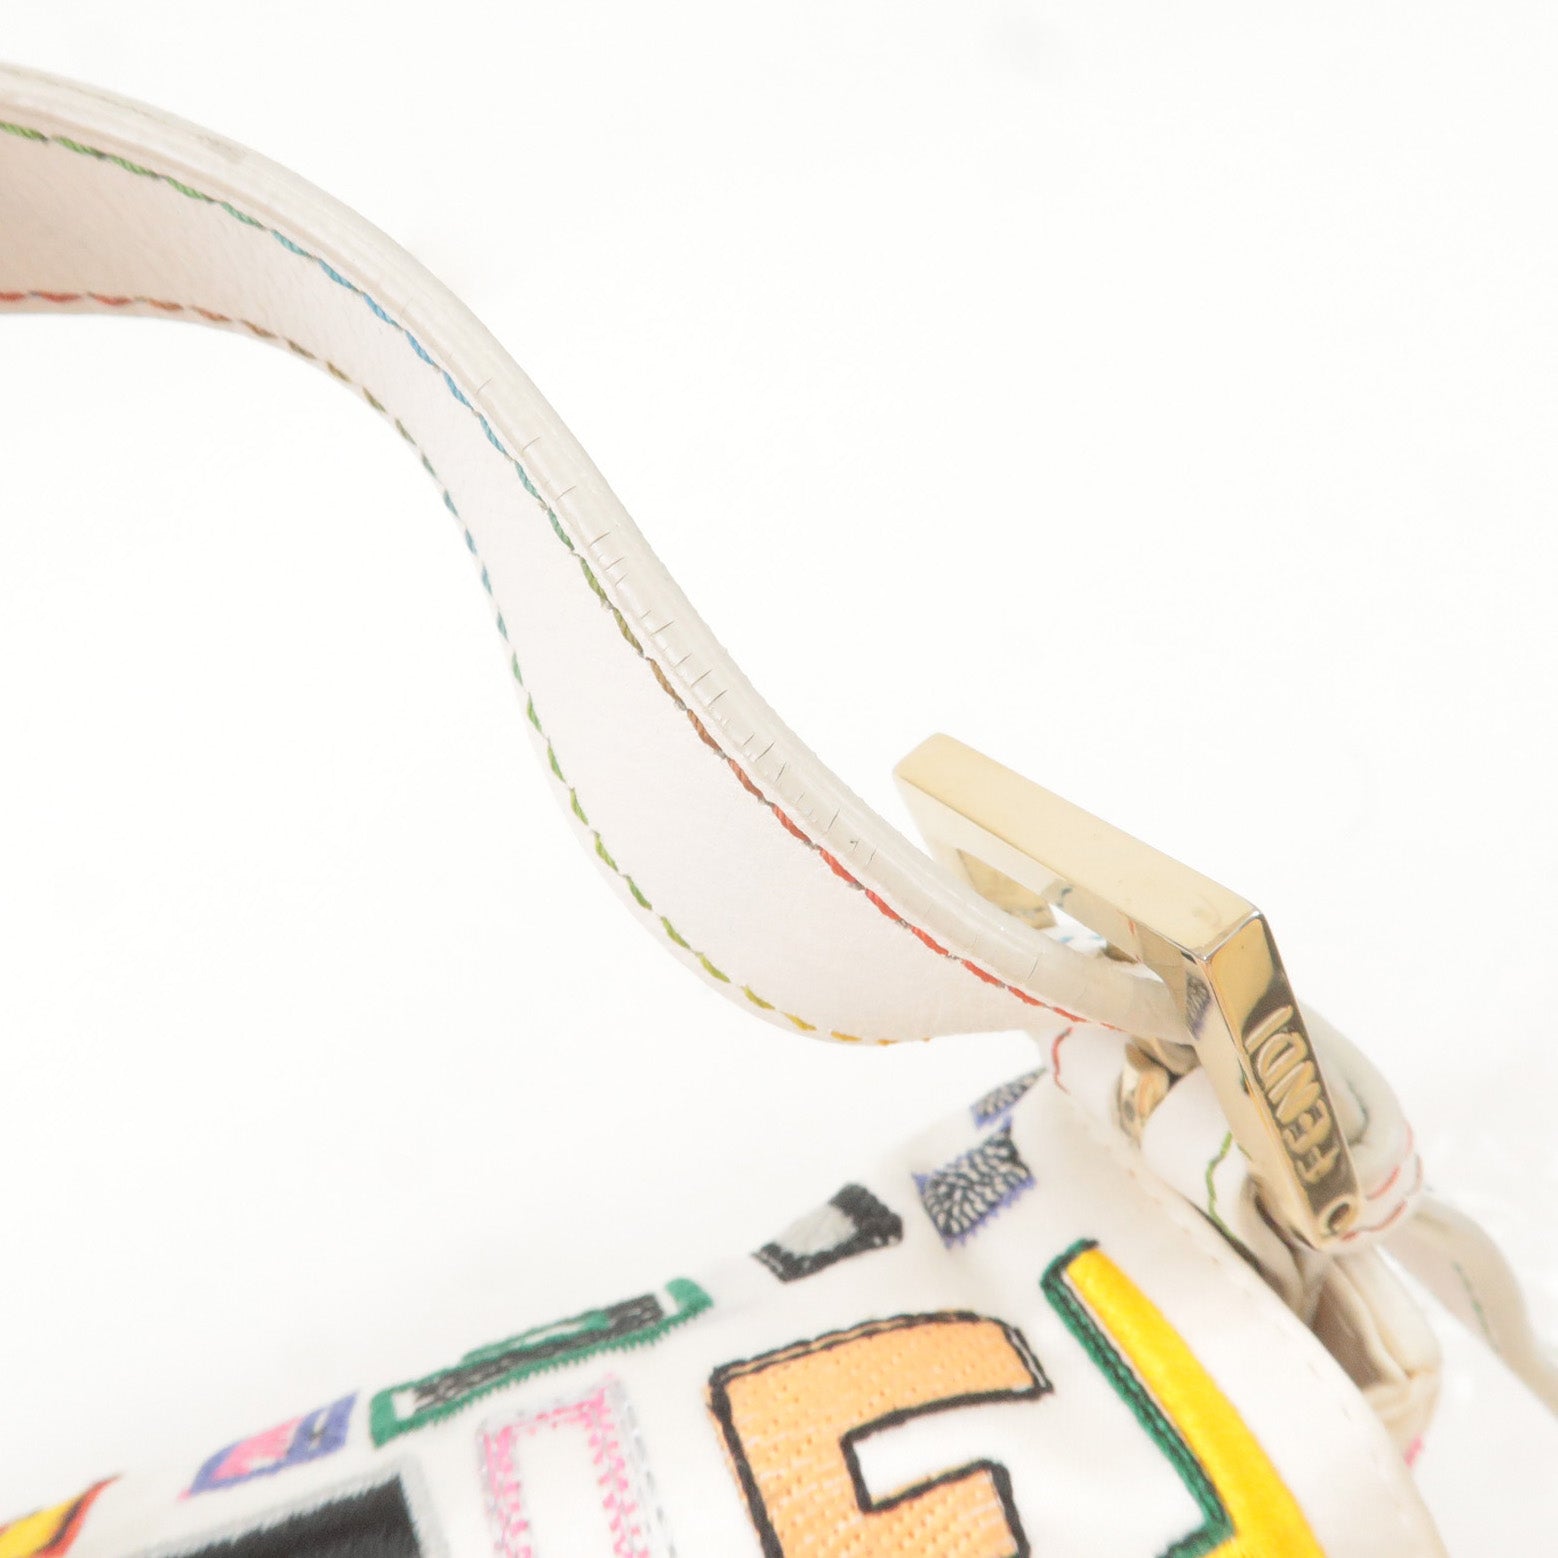 Multicolor canvas bag with FF embroidery